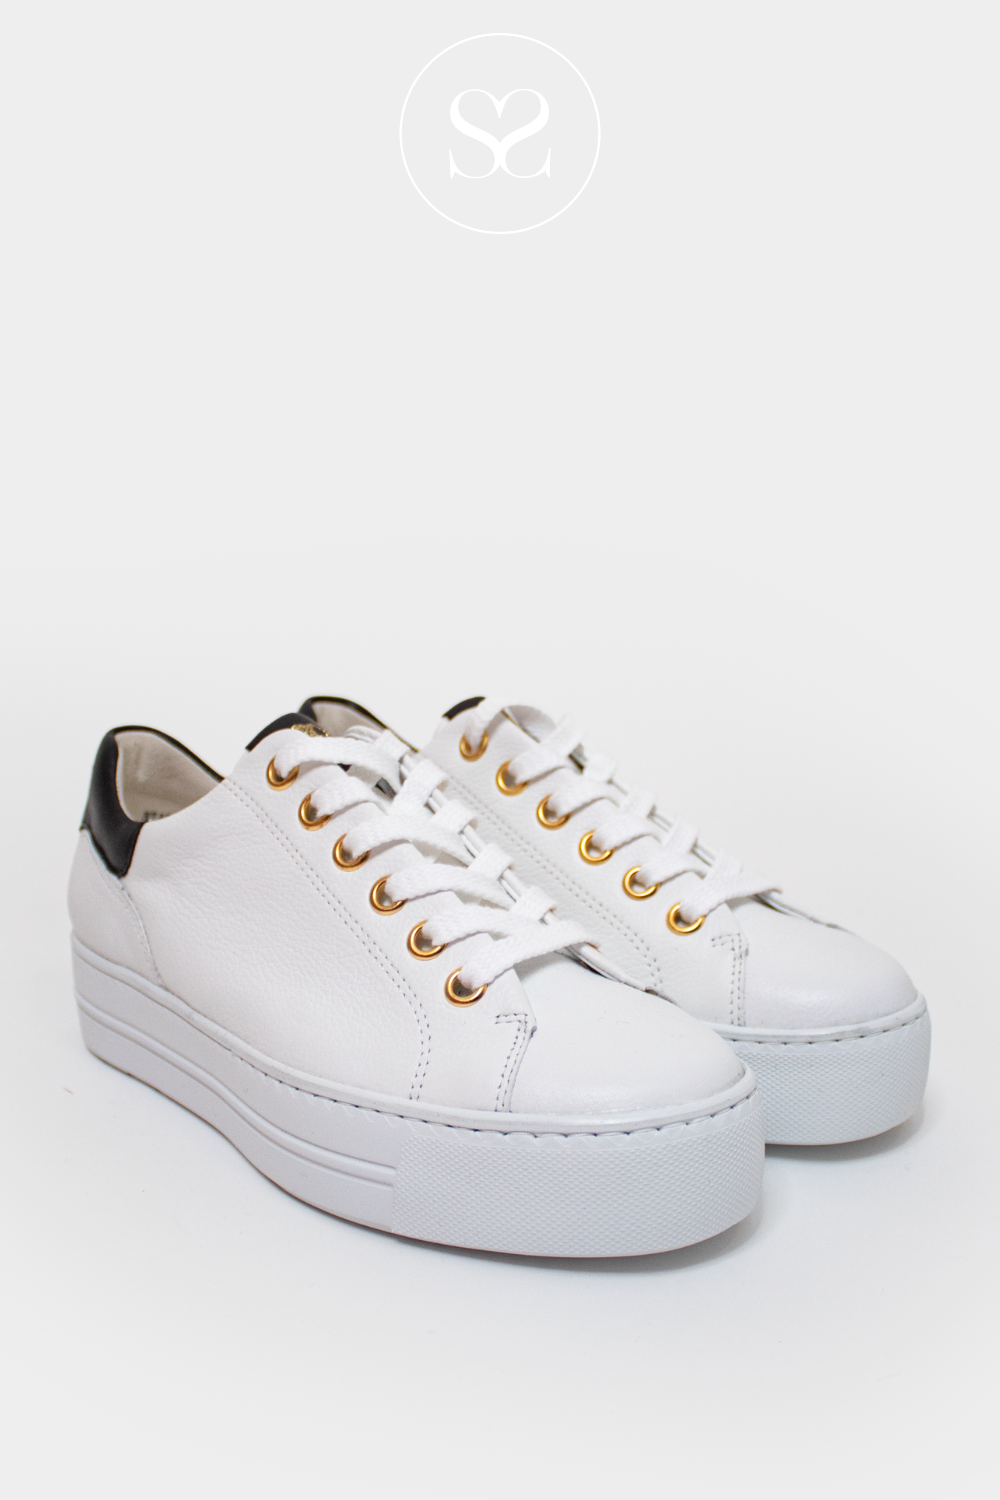 PAUL GREEN 5320 WHITE TRAINERS WITH BLACK IRELAND